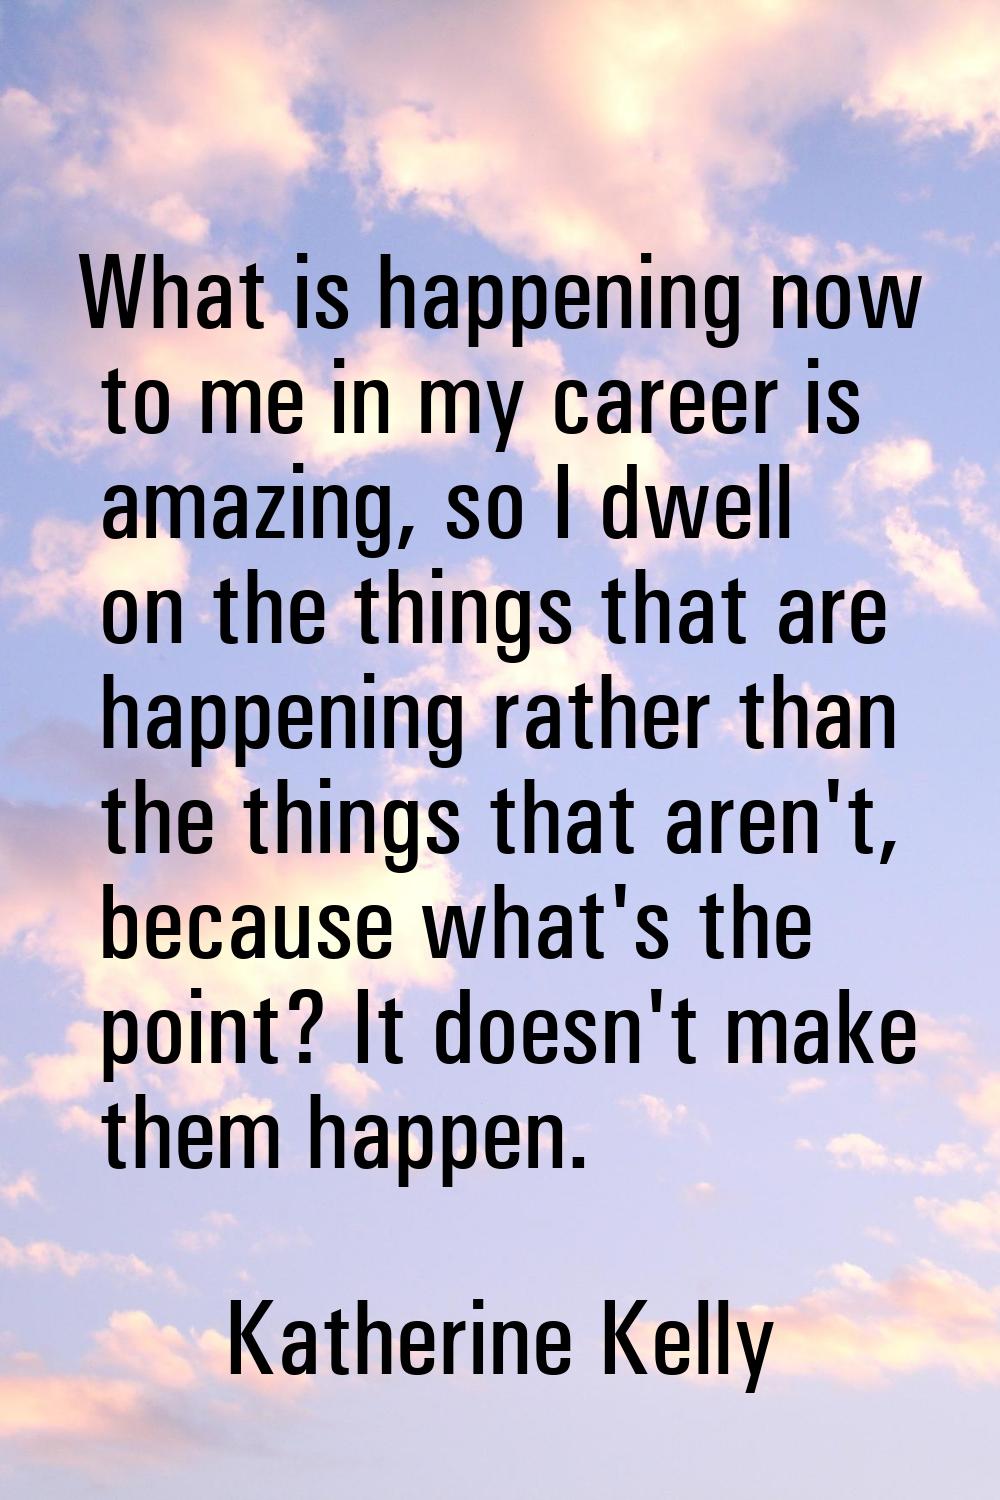 What is happening now to me in my career is amazing, so I dwell on the things that are happening ra